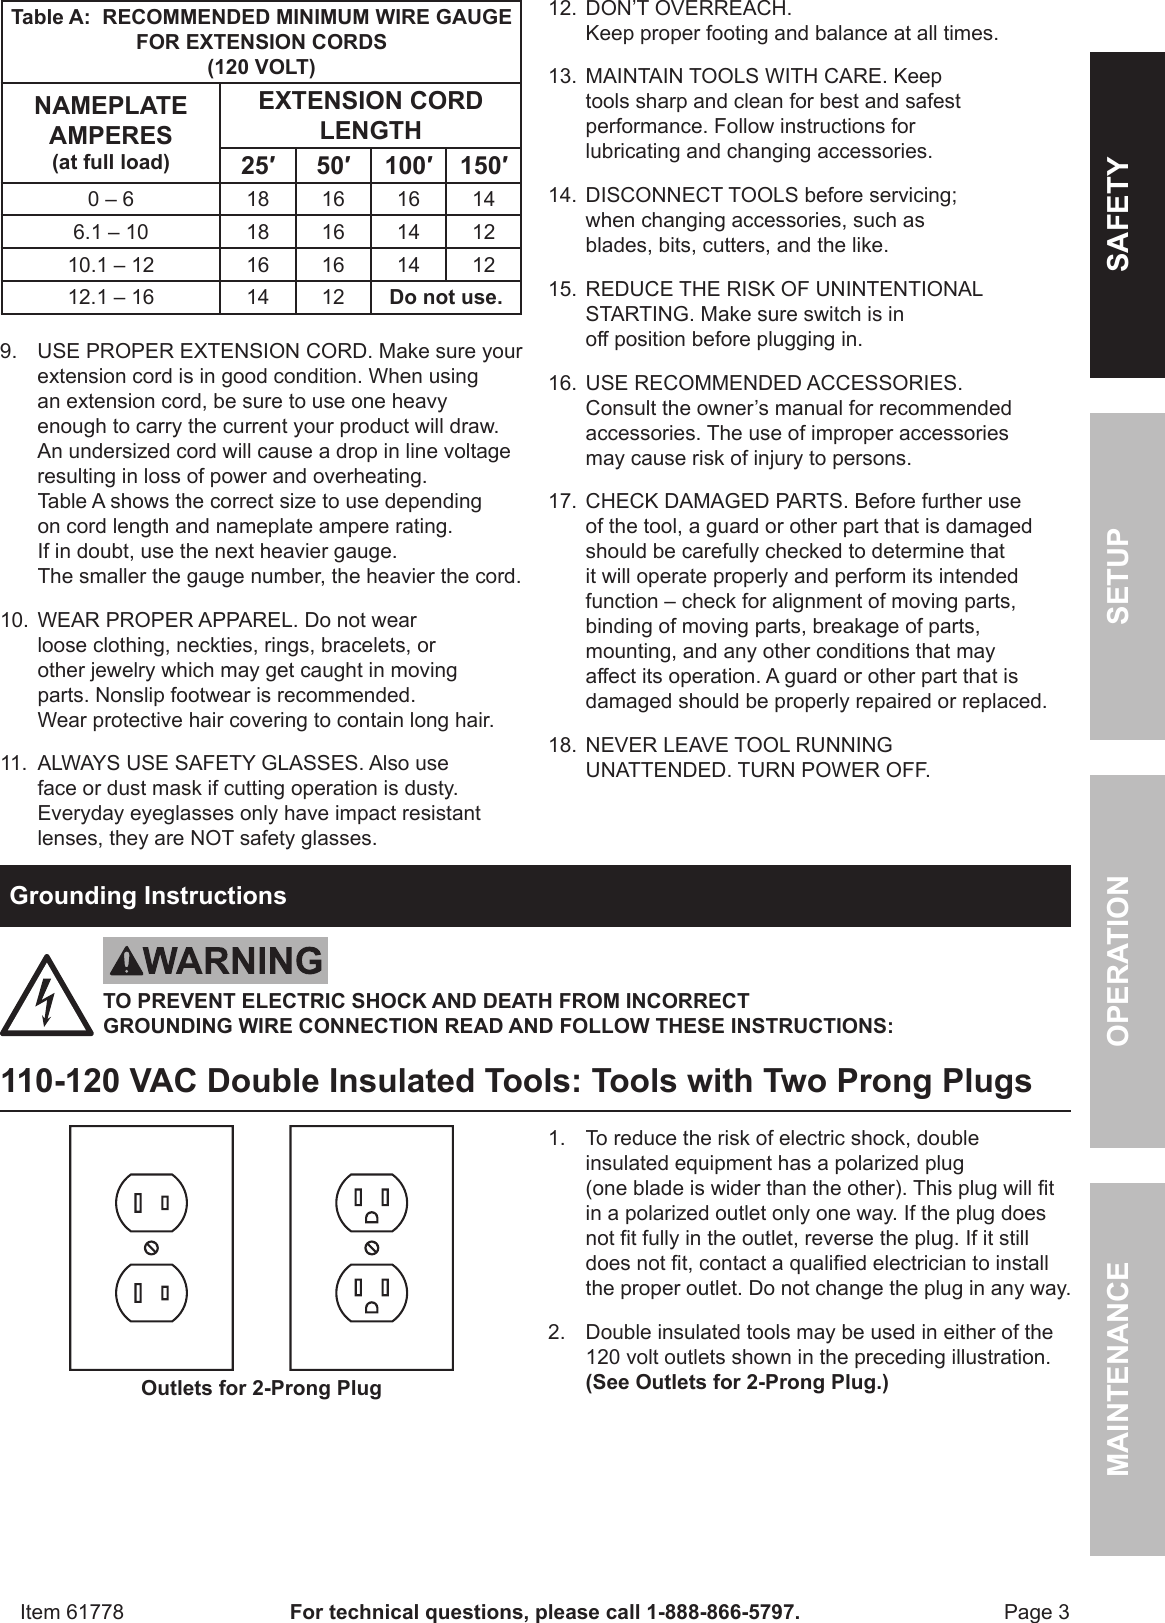 Page 3 of 12 - Harbor-Freight Harbor-Freight-Electric-Drill-Bit-Sharpener-Product-Manual-  Harbor-freight-electric-drill-bit-sharpener-product-manual